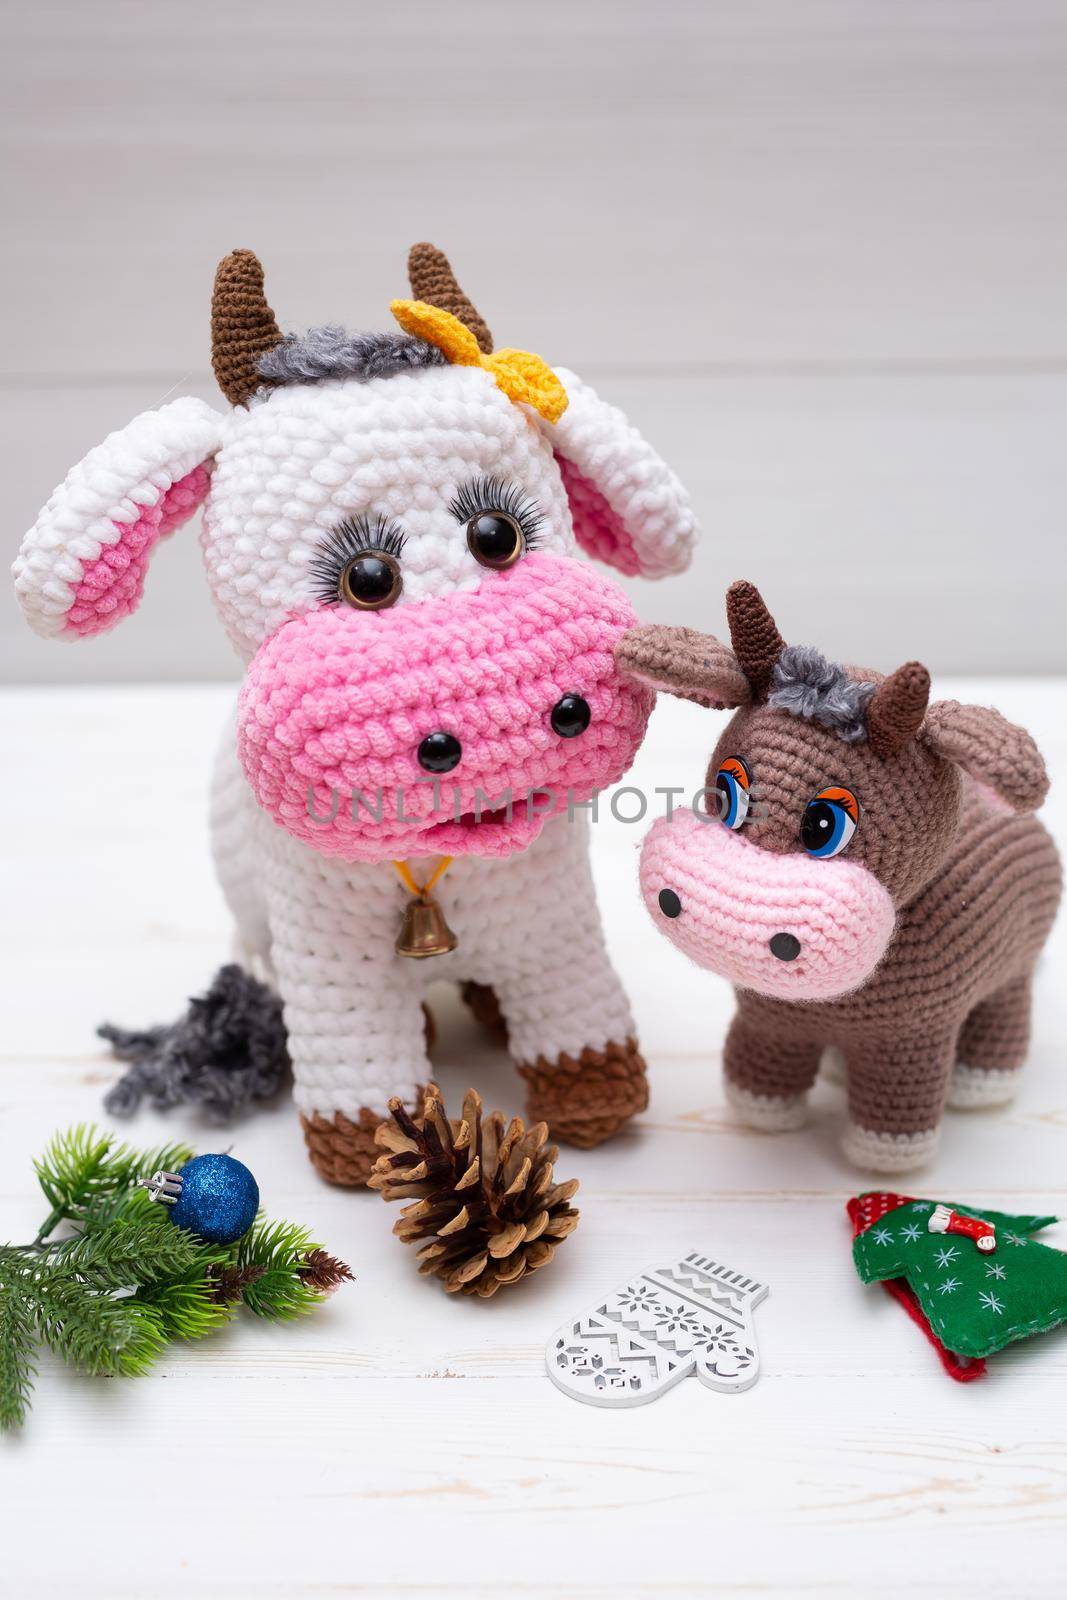 A knitted bull. A soft toy as a symbol of the New Year by StudioPeace